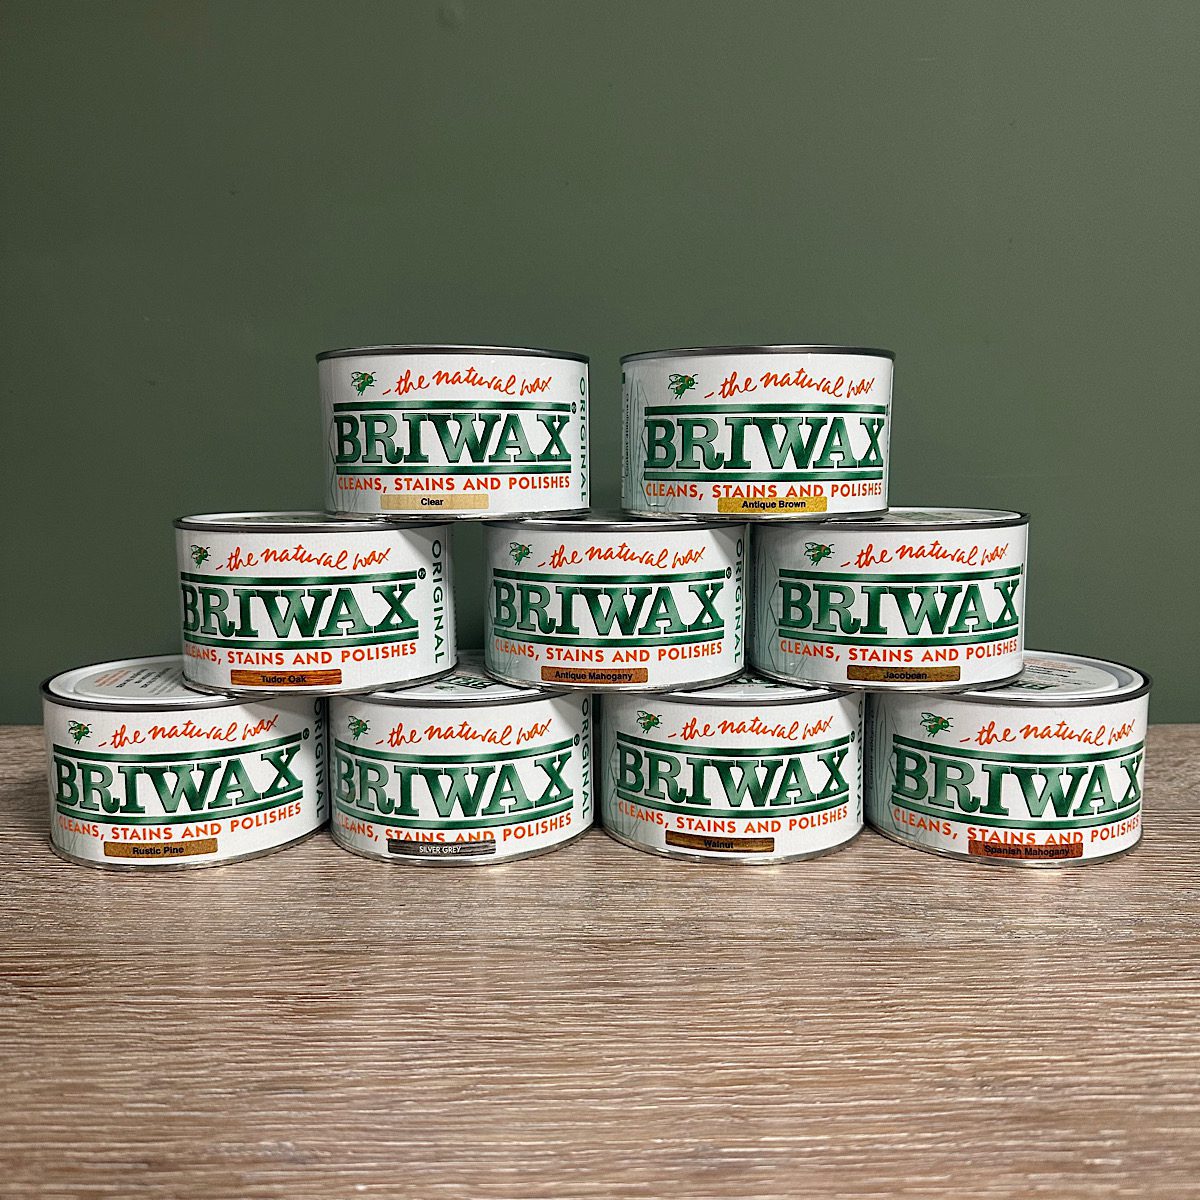 Briwax (Silver Gray) Furniture Wax Polish, Cleans, stains, and polishe -  Hard To Get Items